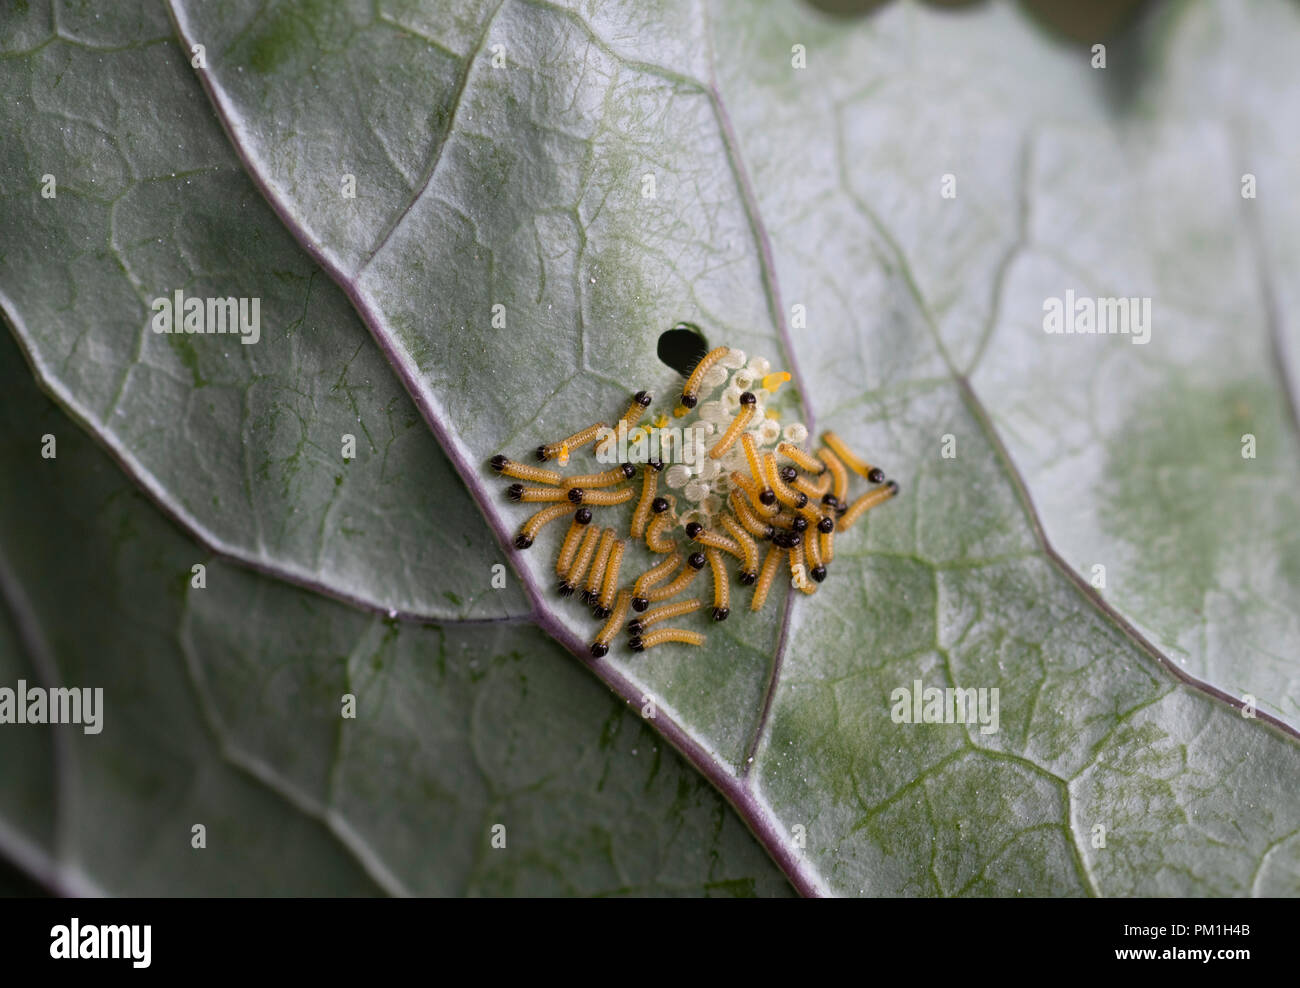 Newly hatched cabbage white butterfly caterpillars and eggs on the underside of a Kohlrabi leaf Stock Photo